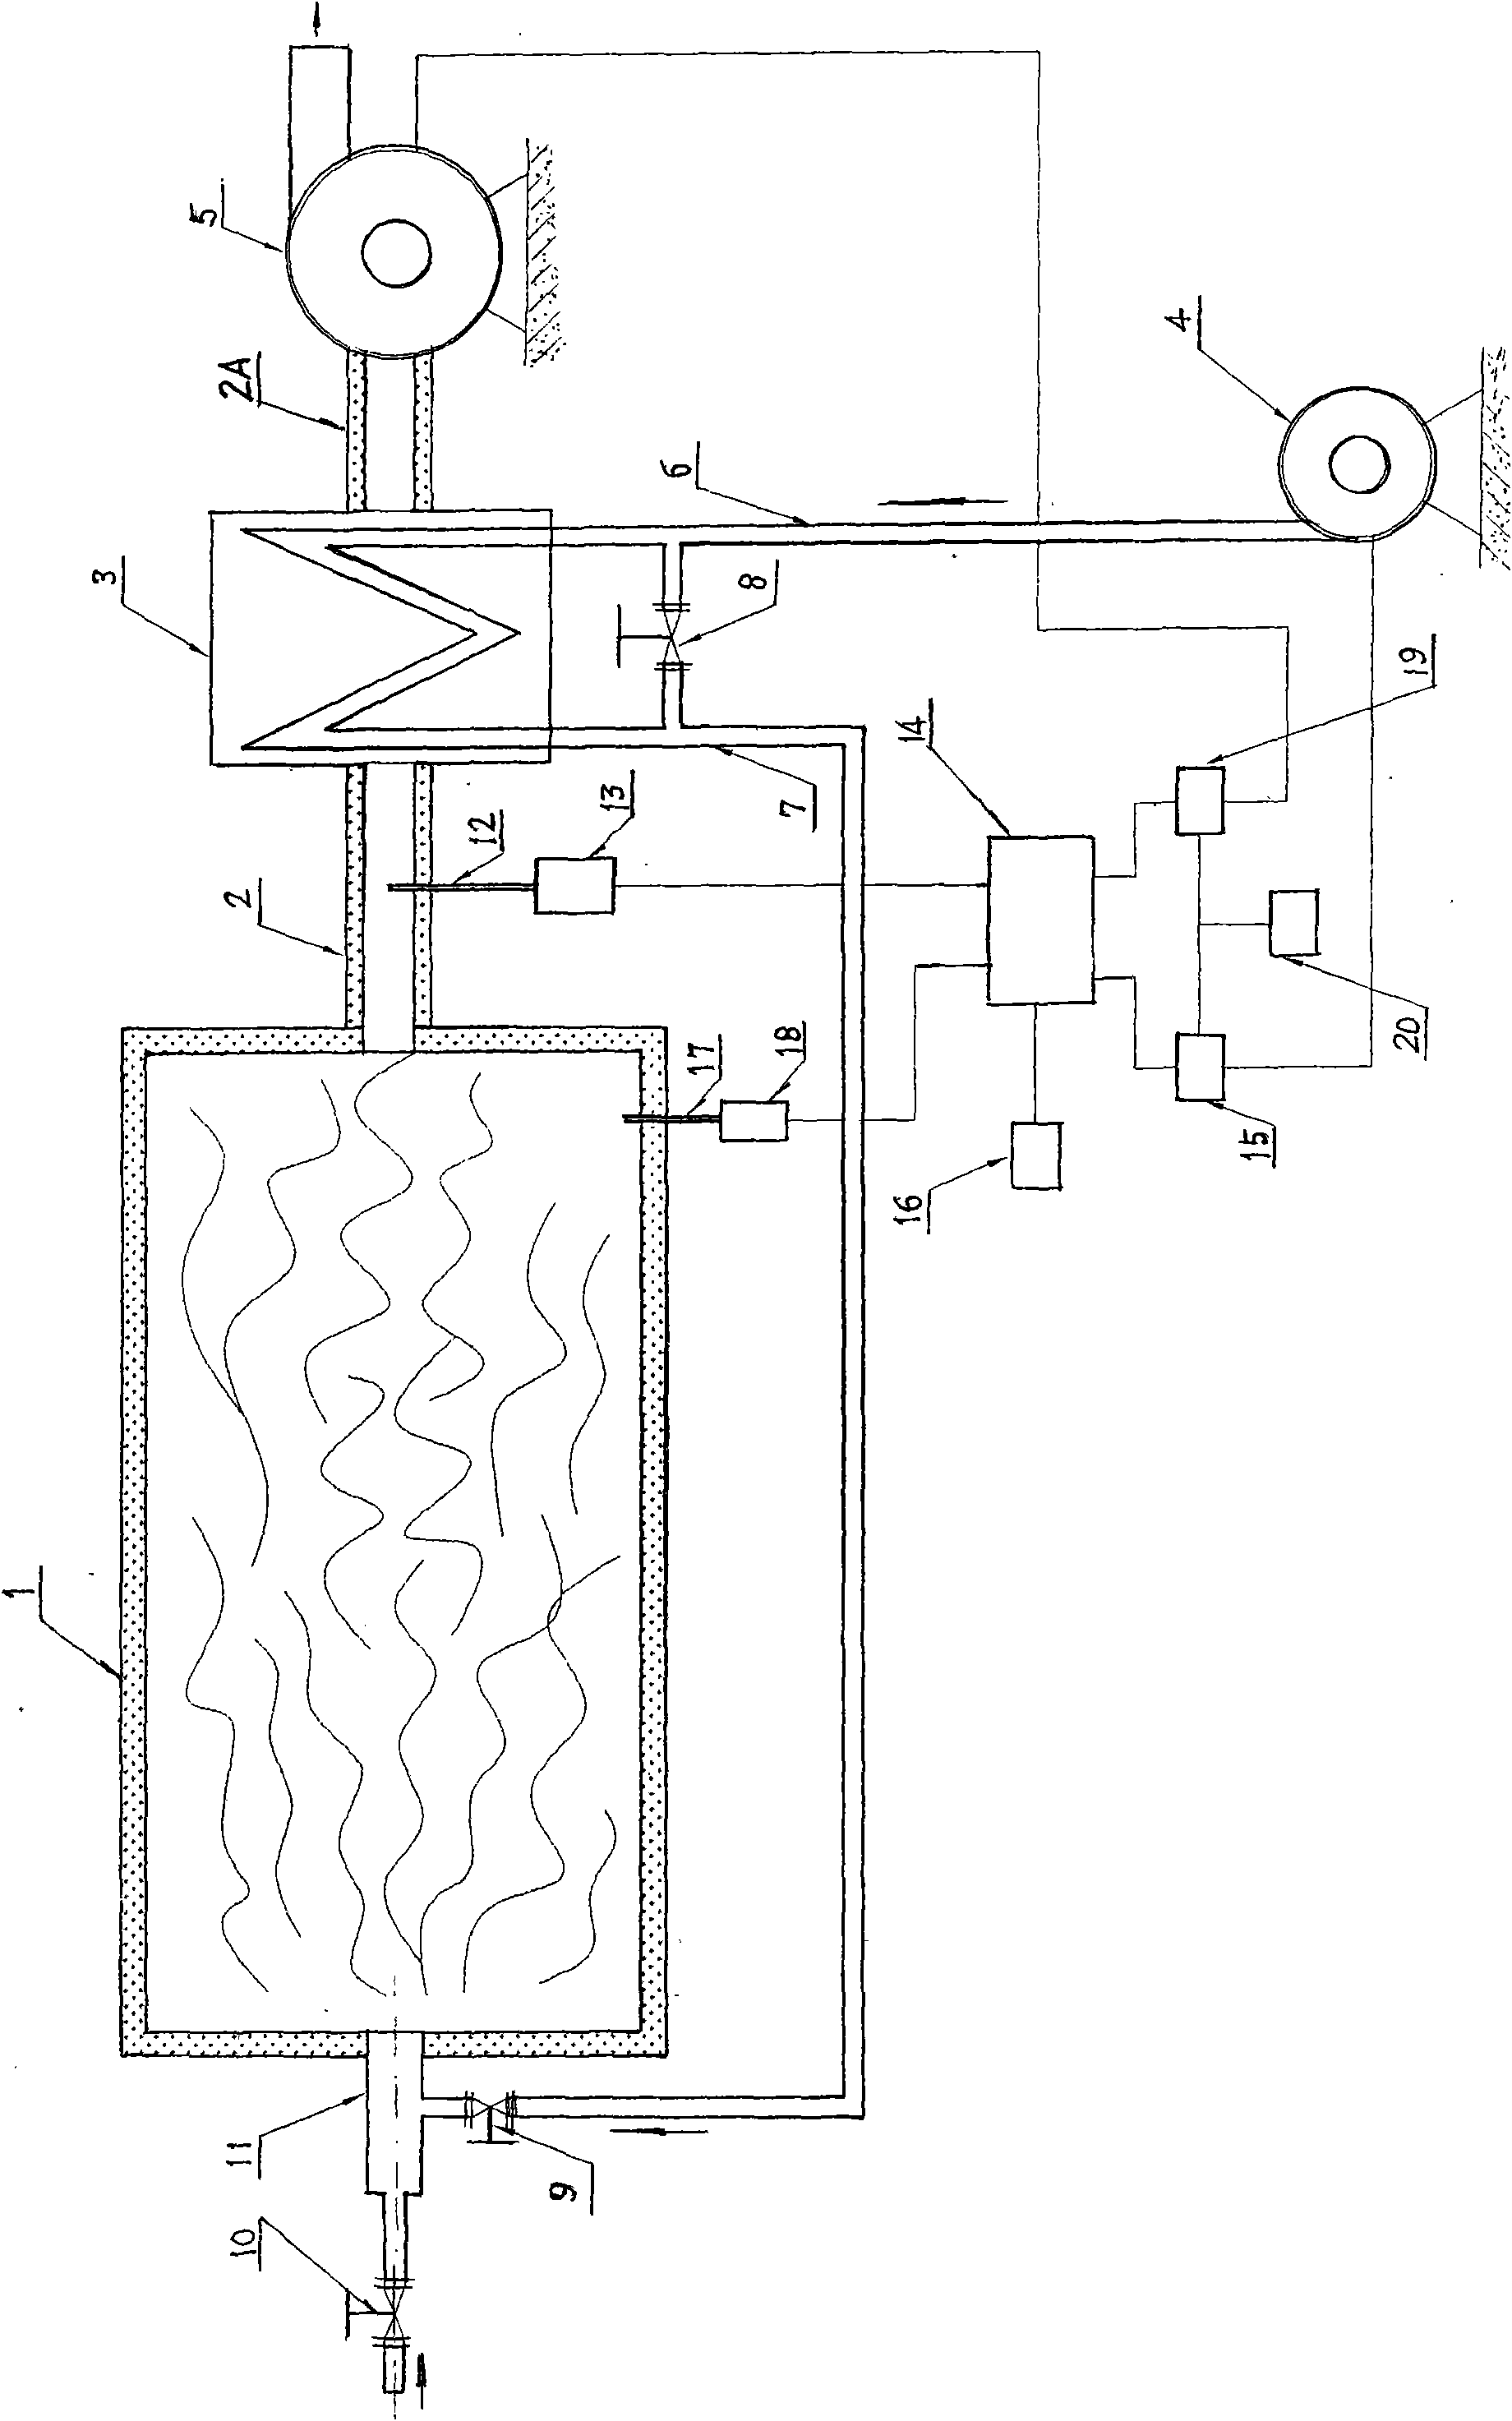 Optimized air-distribution control system for industrial furnace